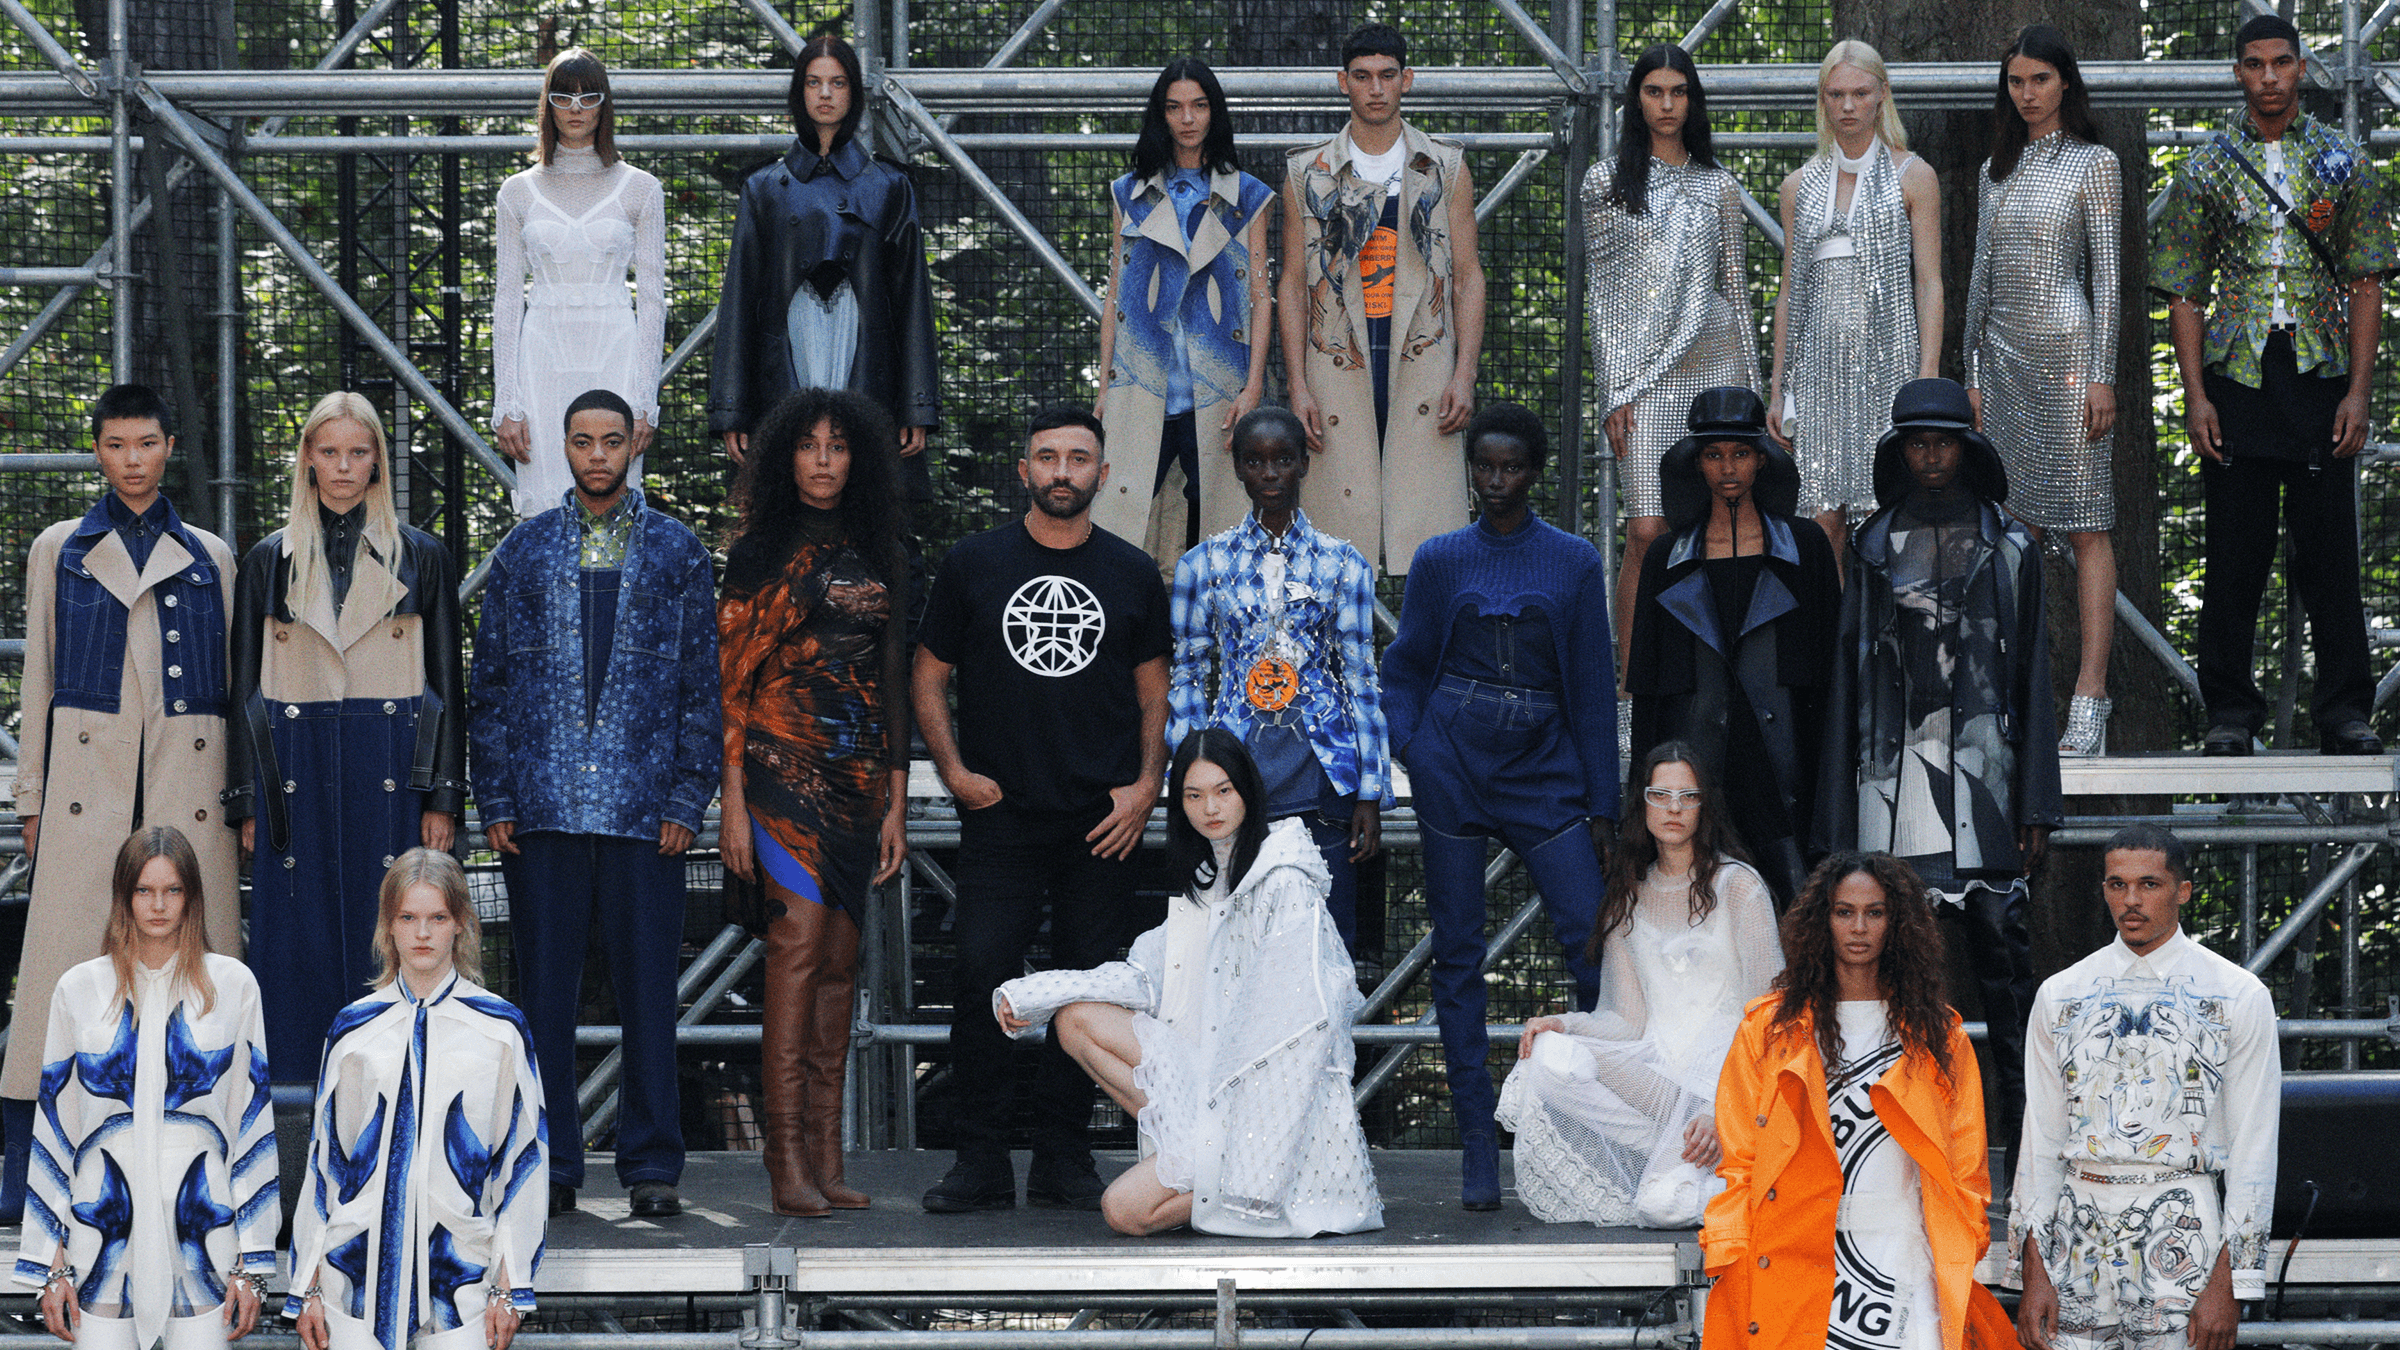 The show must go on: what do Fashion Weeks look like during Covid-19?